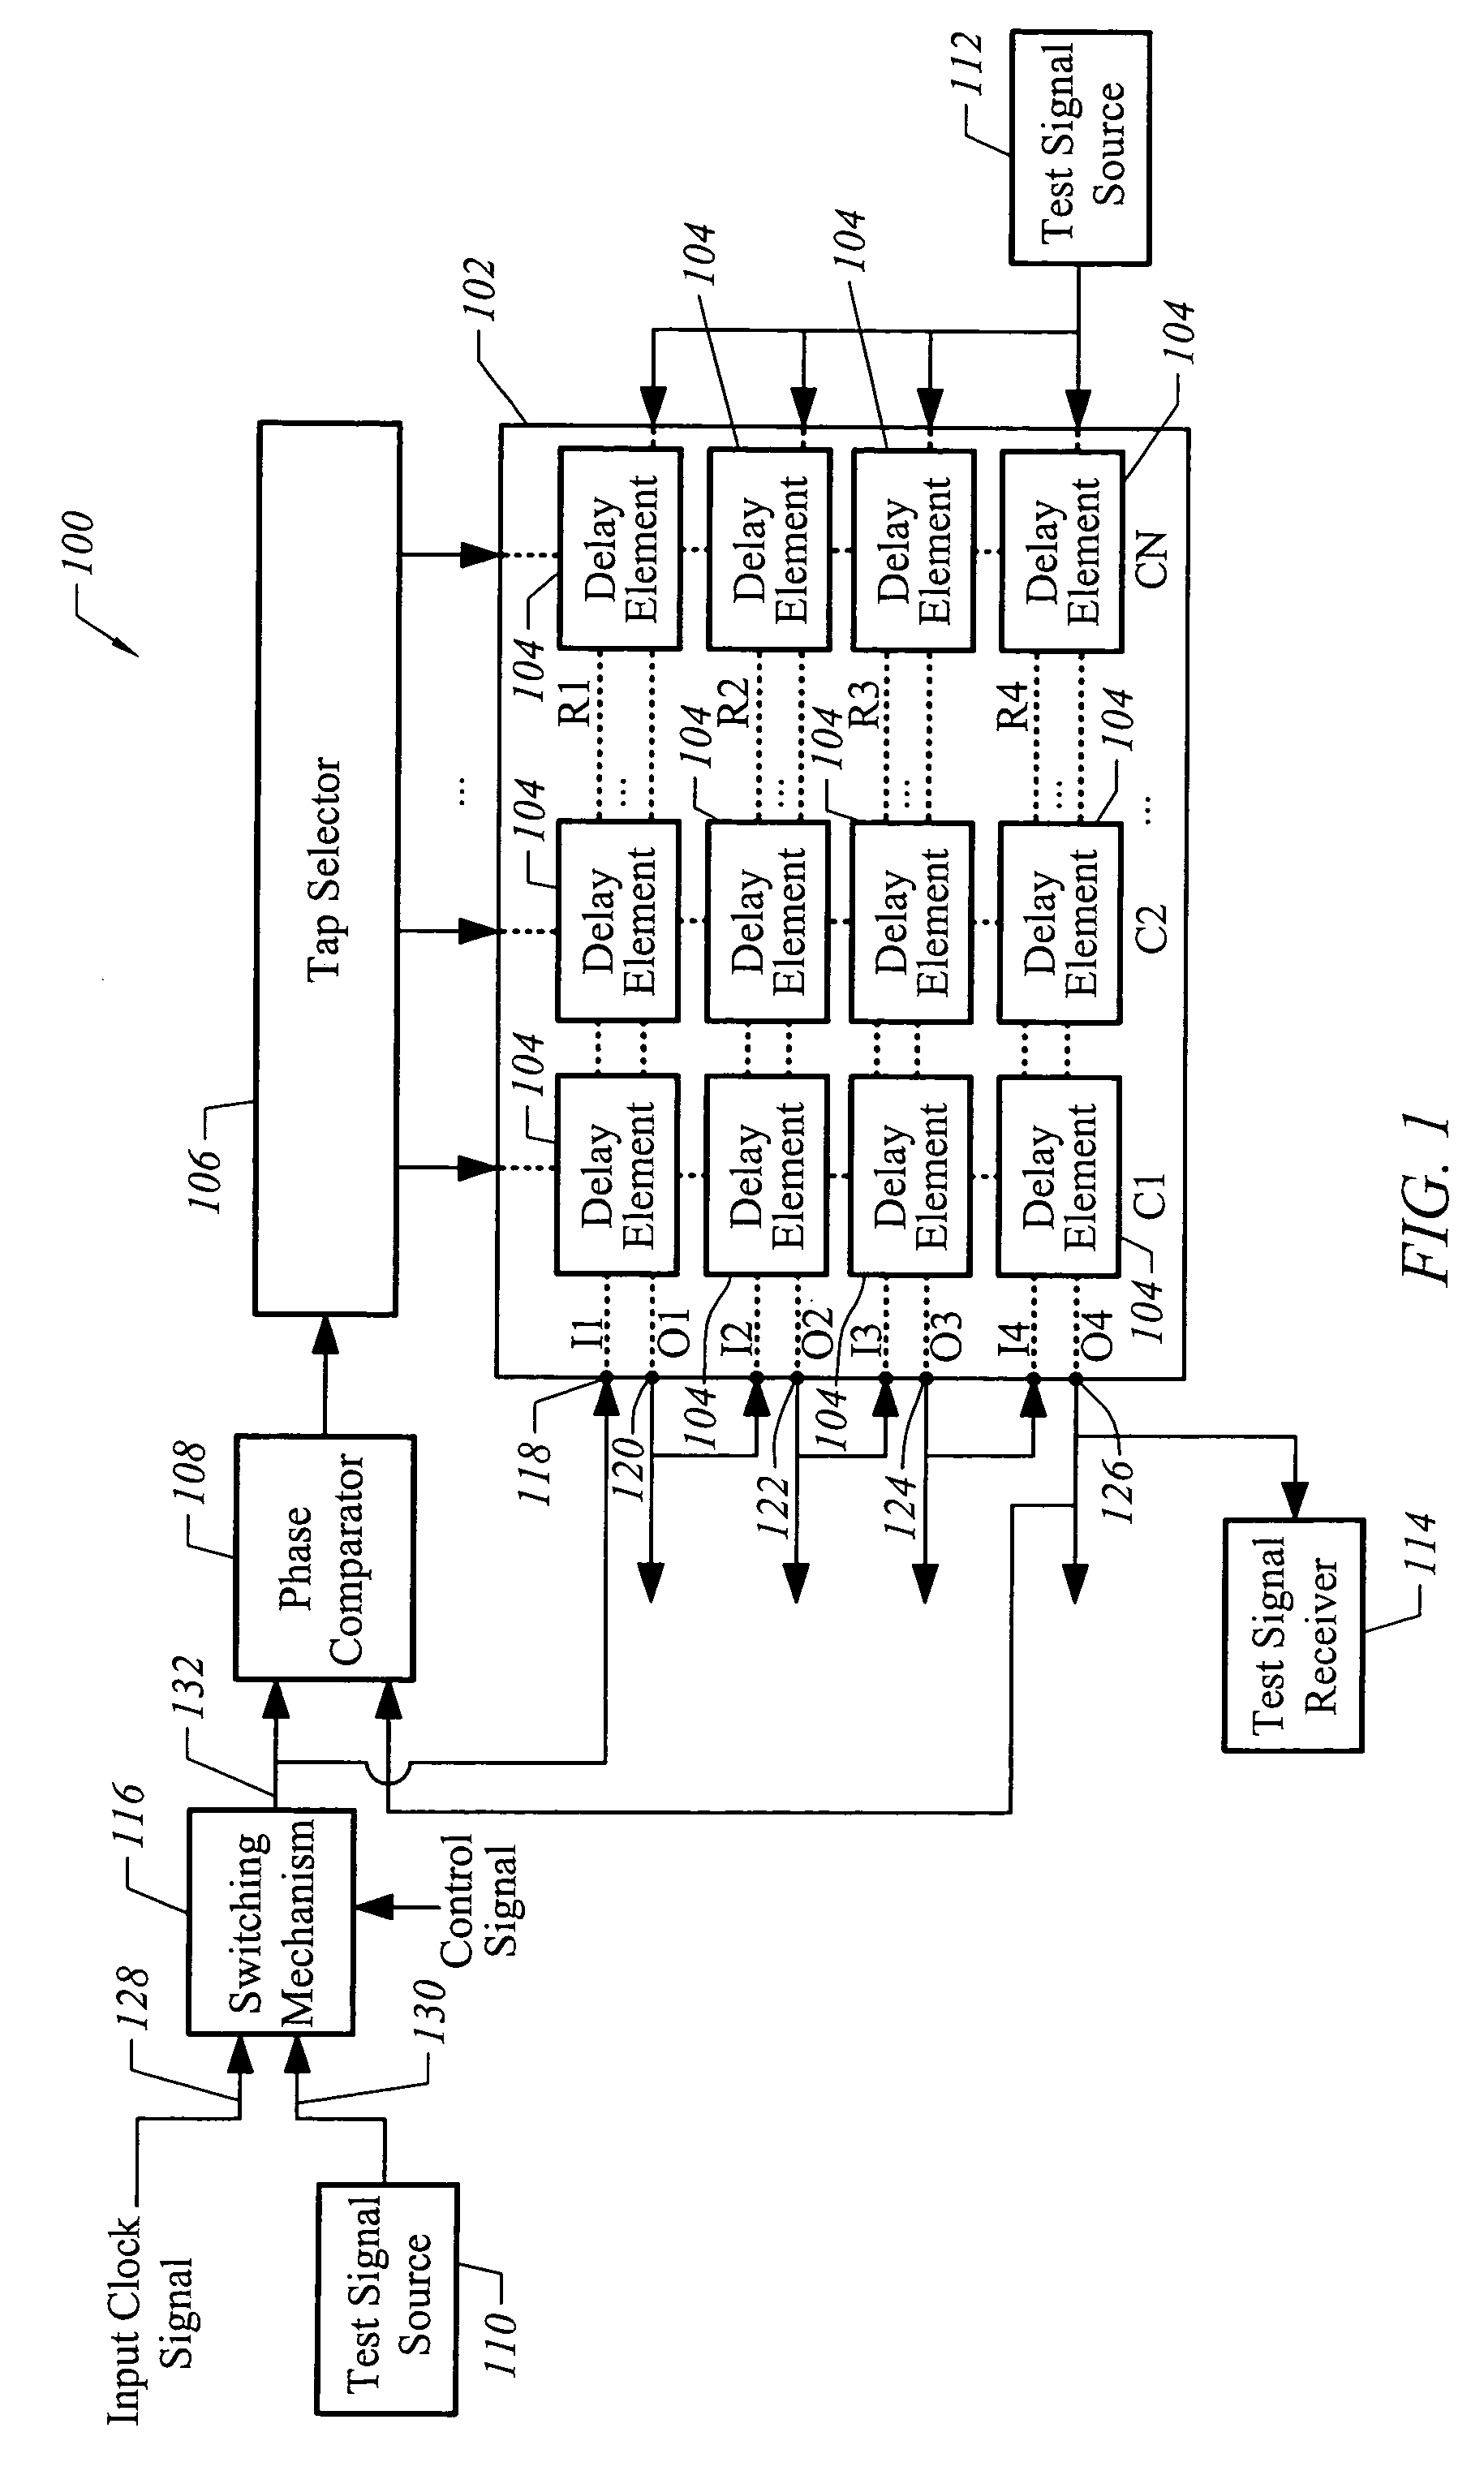 Delay locked loop circuit and method for testing the operability of the circuit